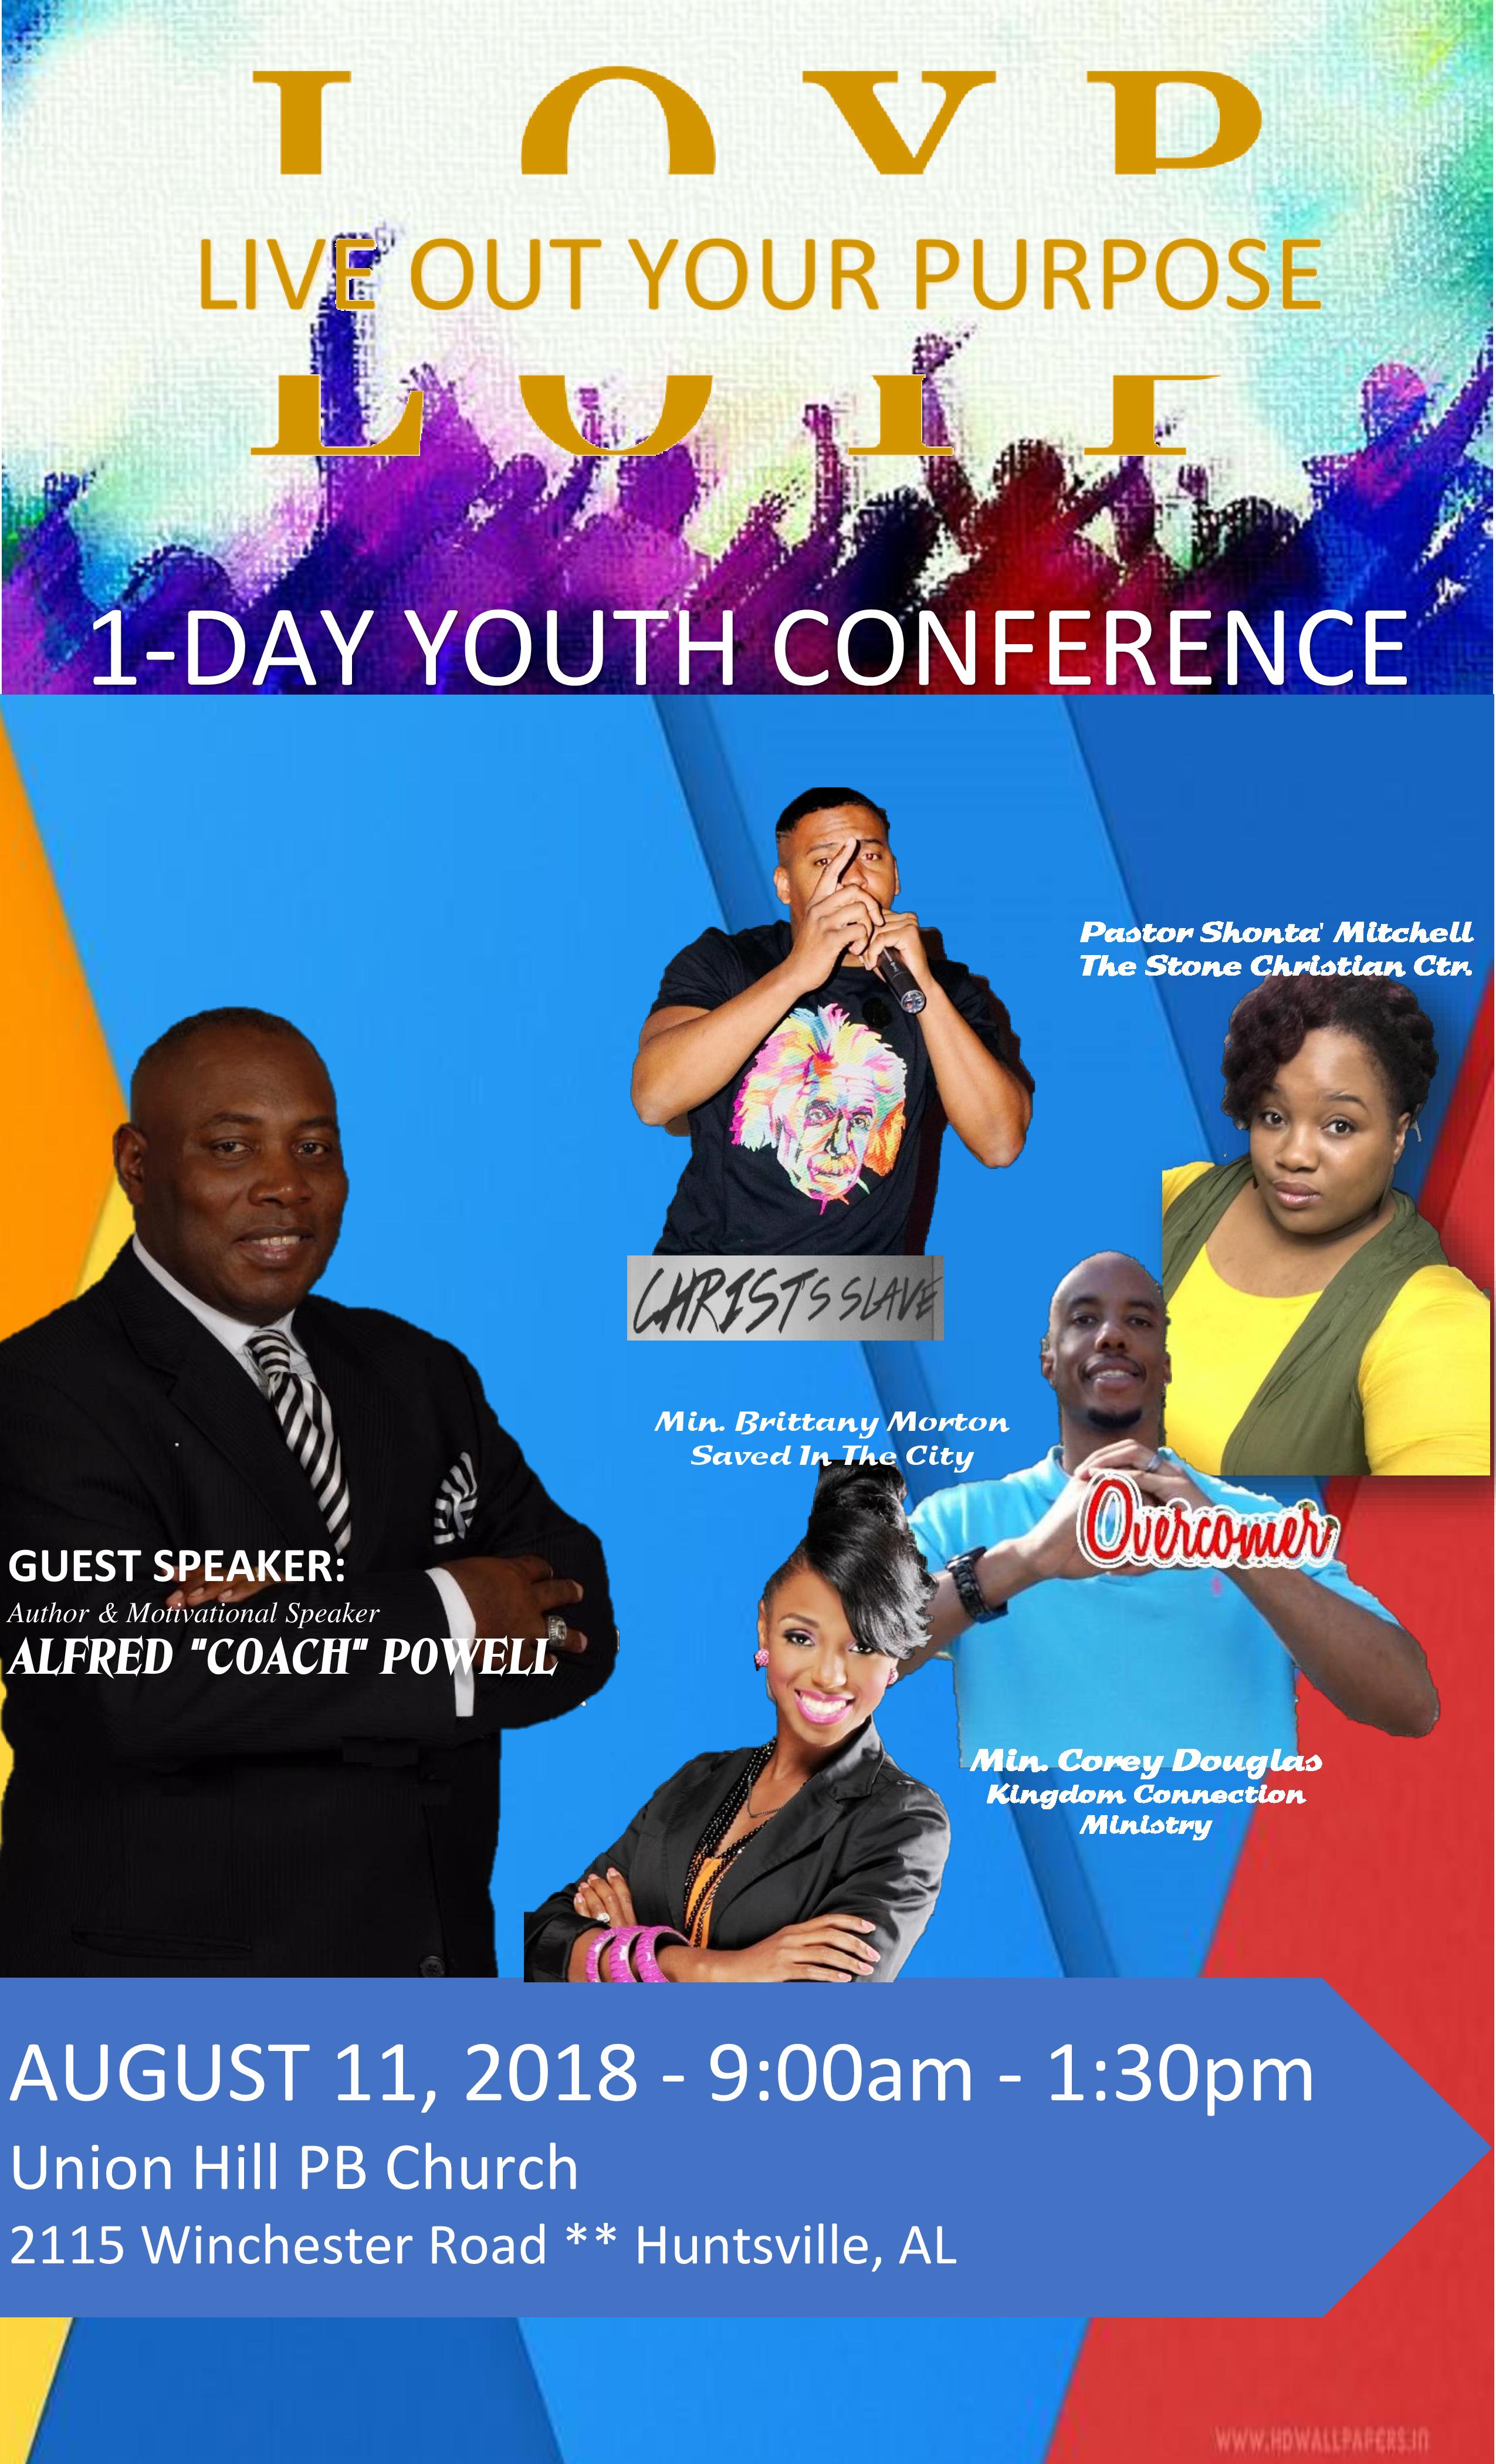 1 Day Youth Conference "Live Out Your Purpose"